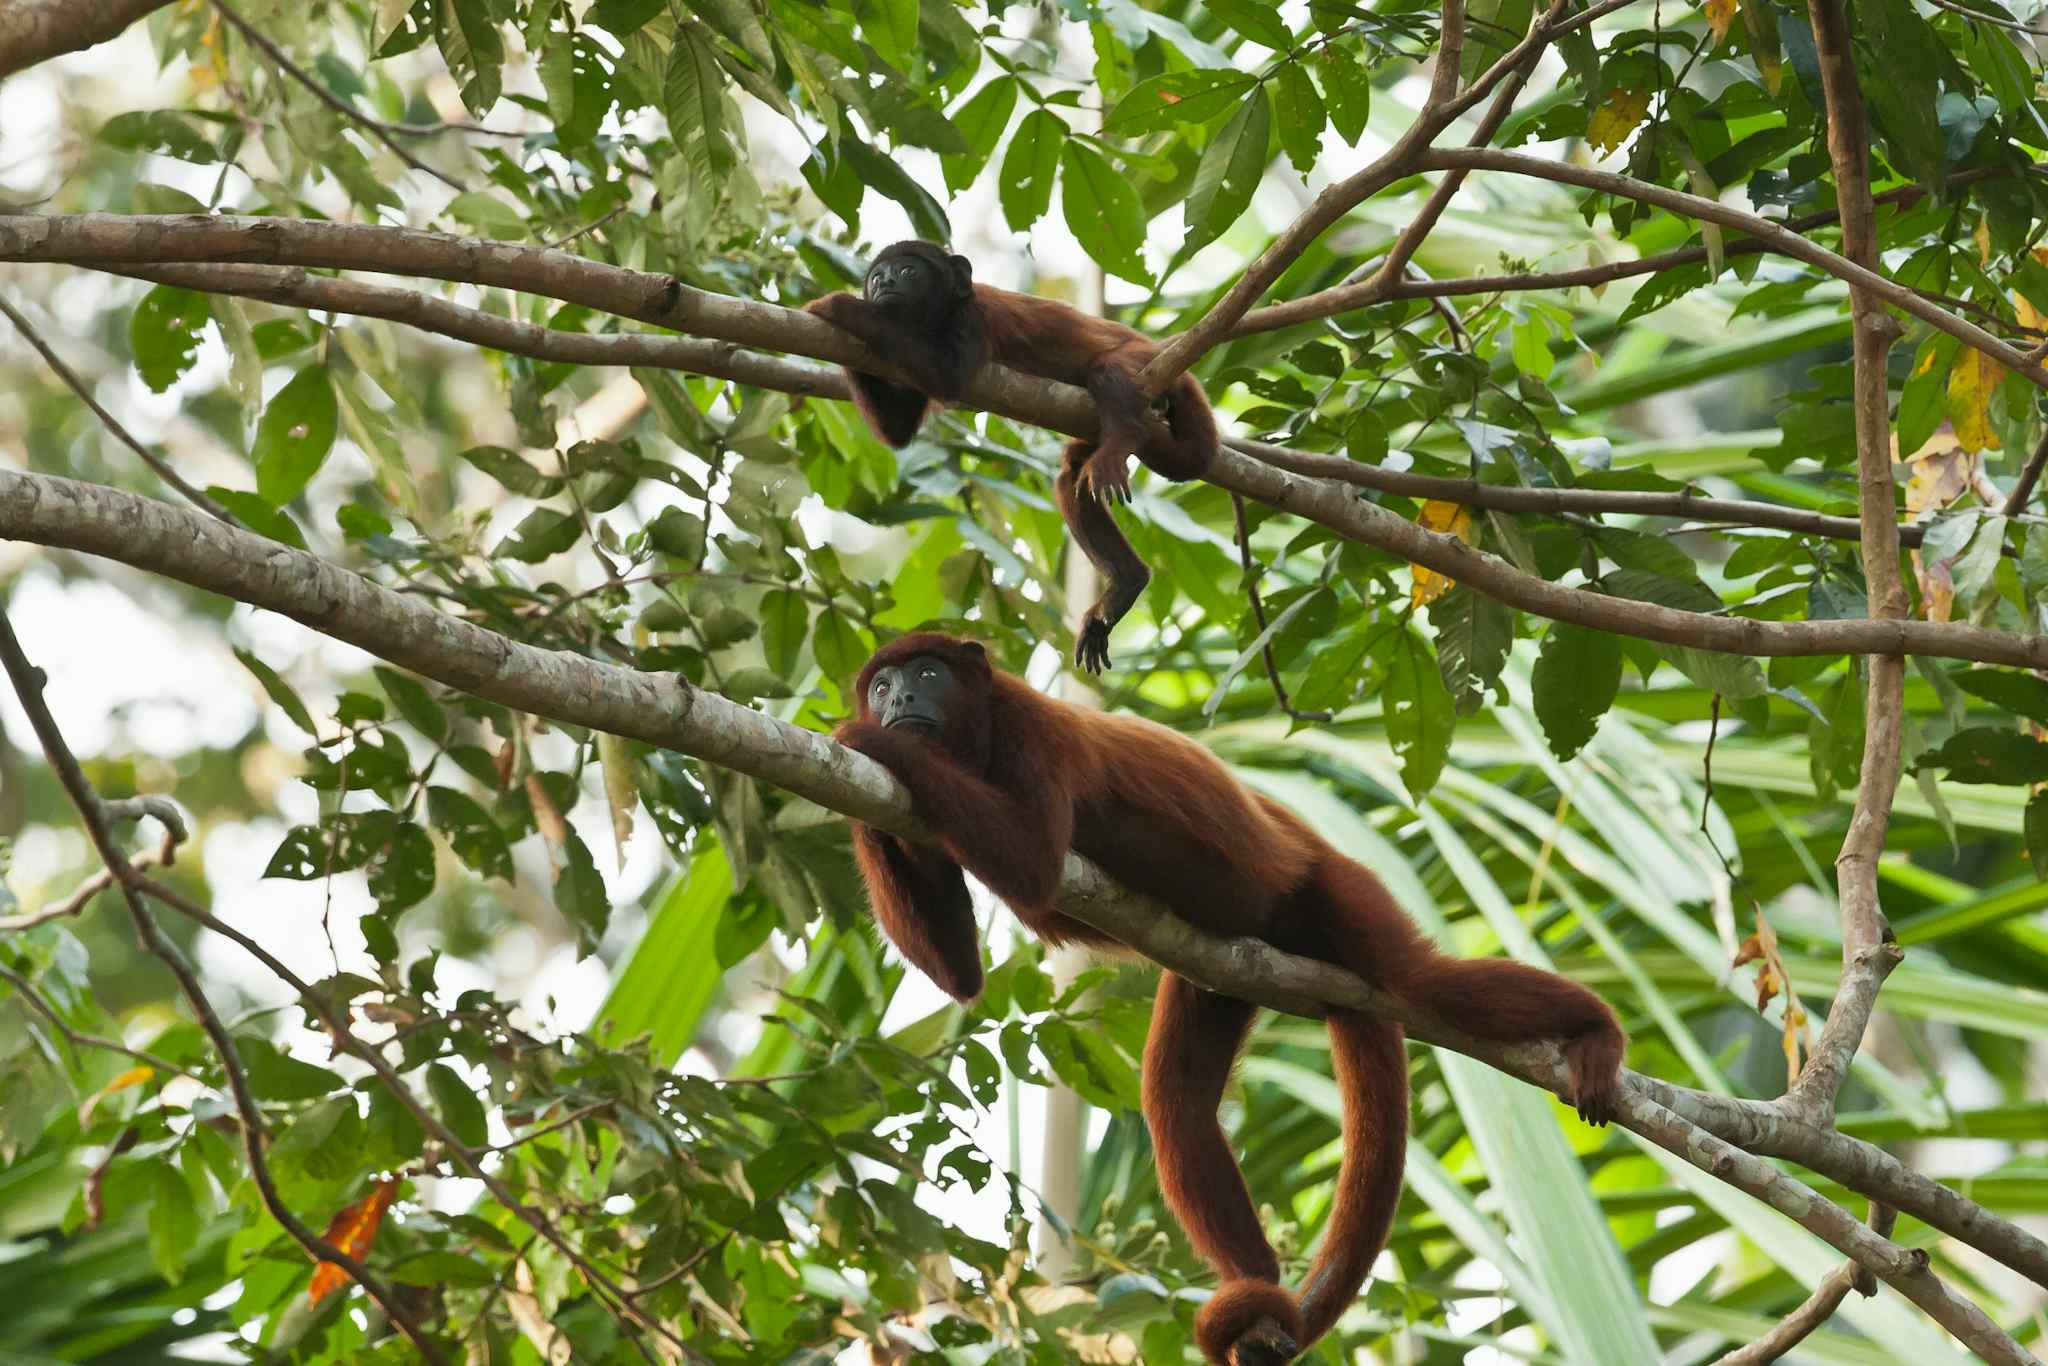 Red Howler Monkeys laying on a branch in Tamobata rainforest, Amazon, Peru.